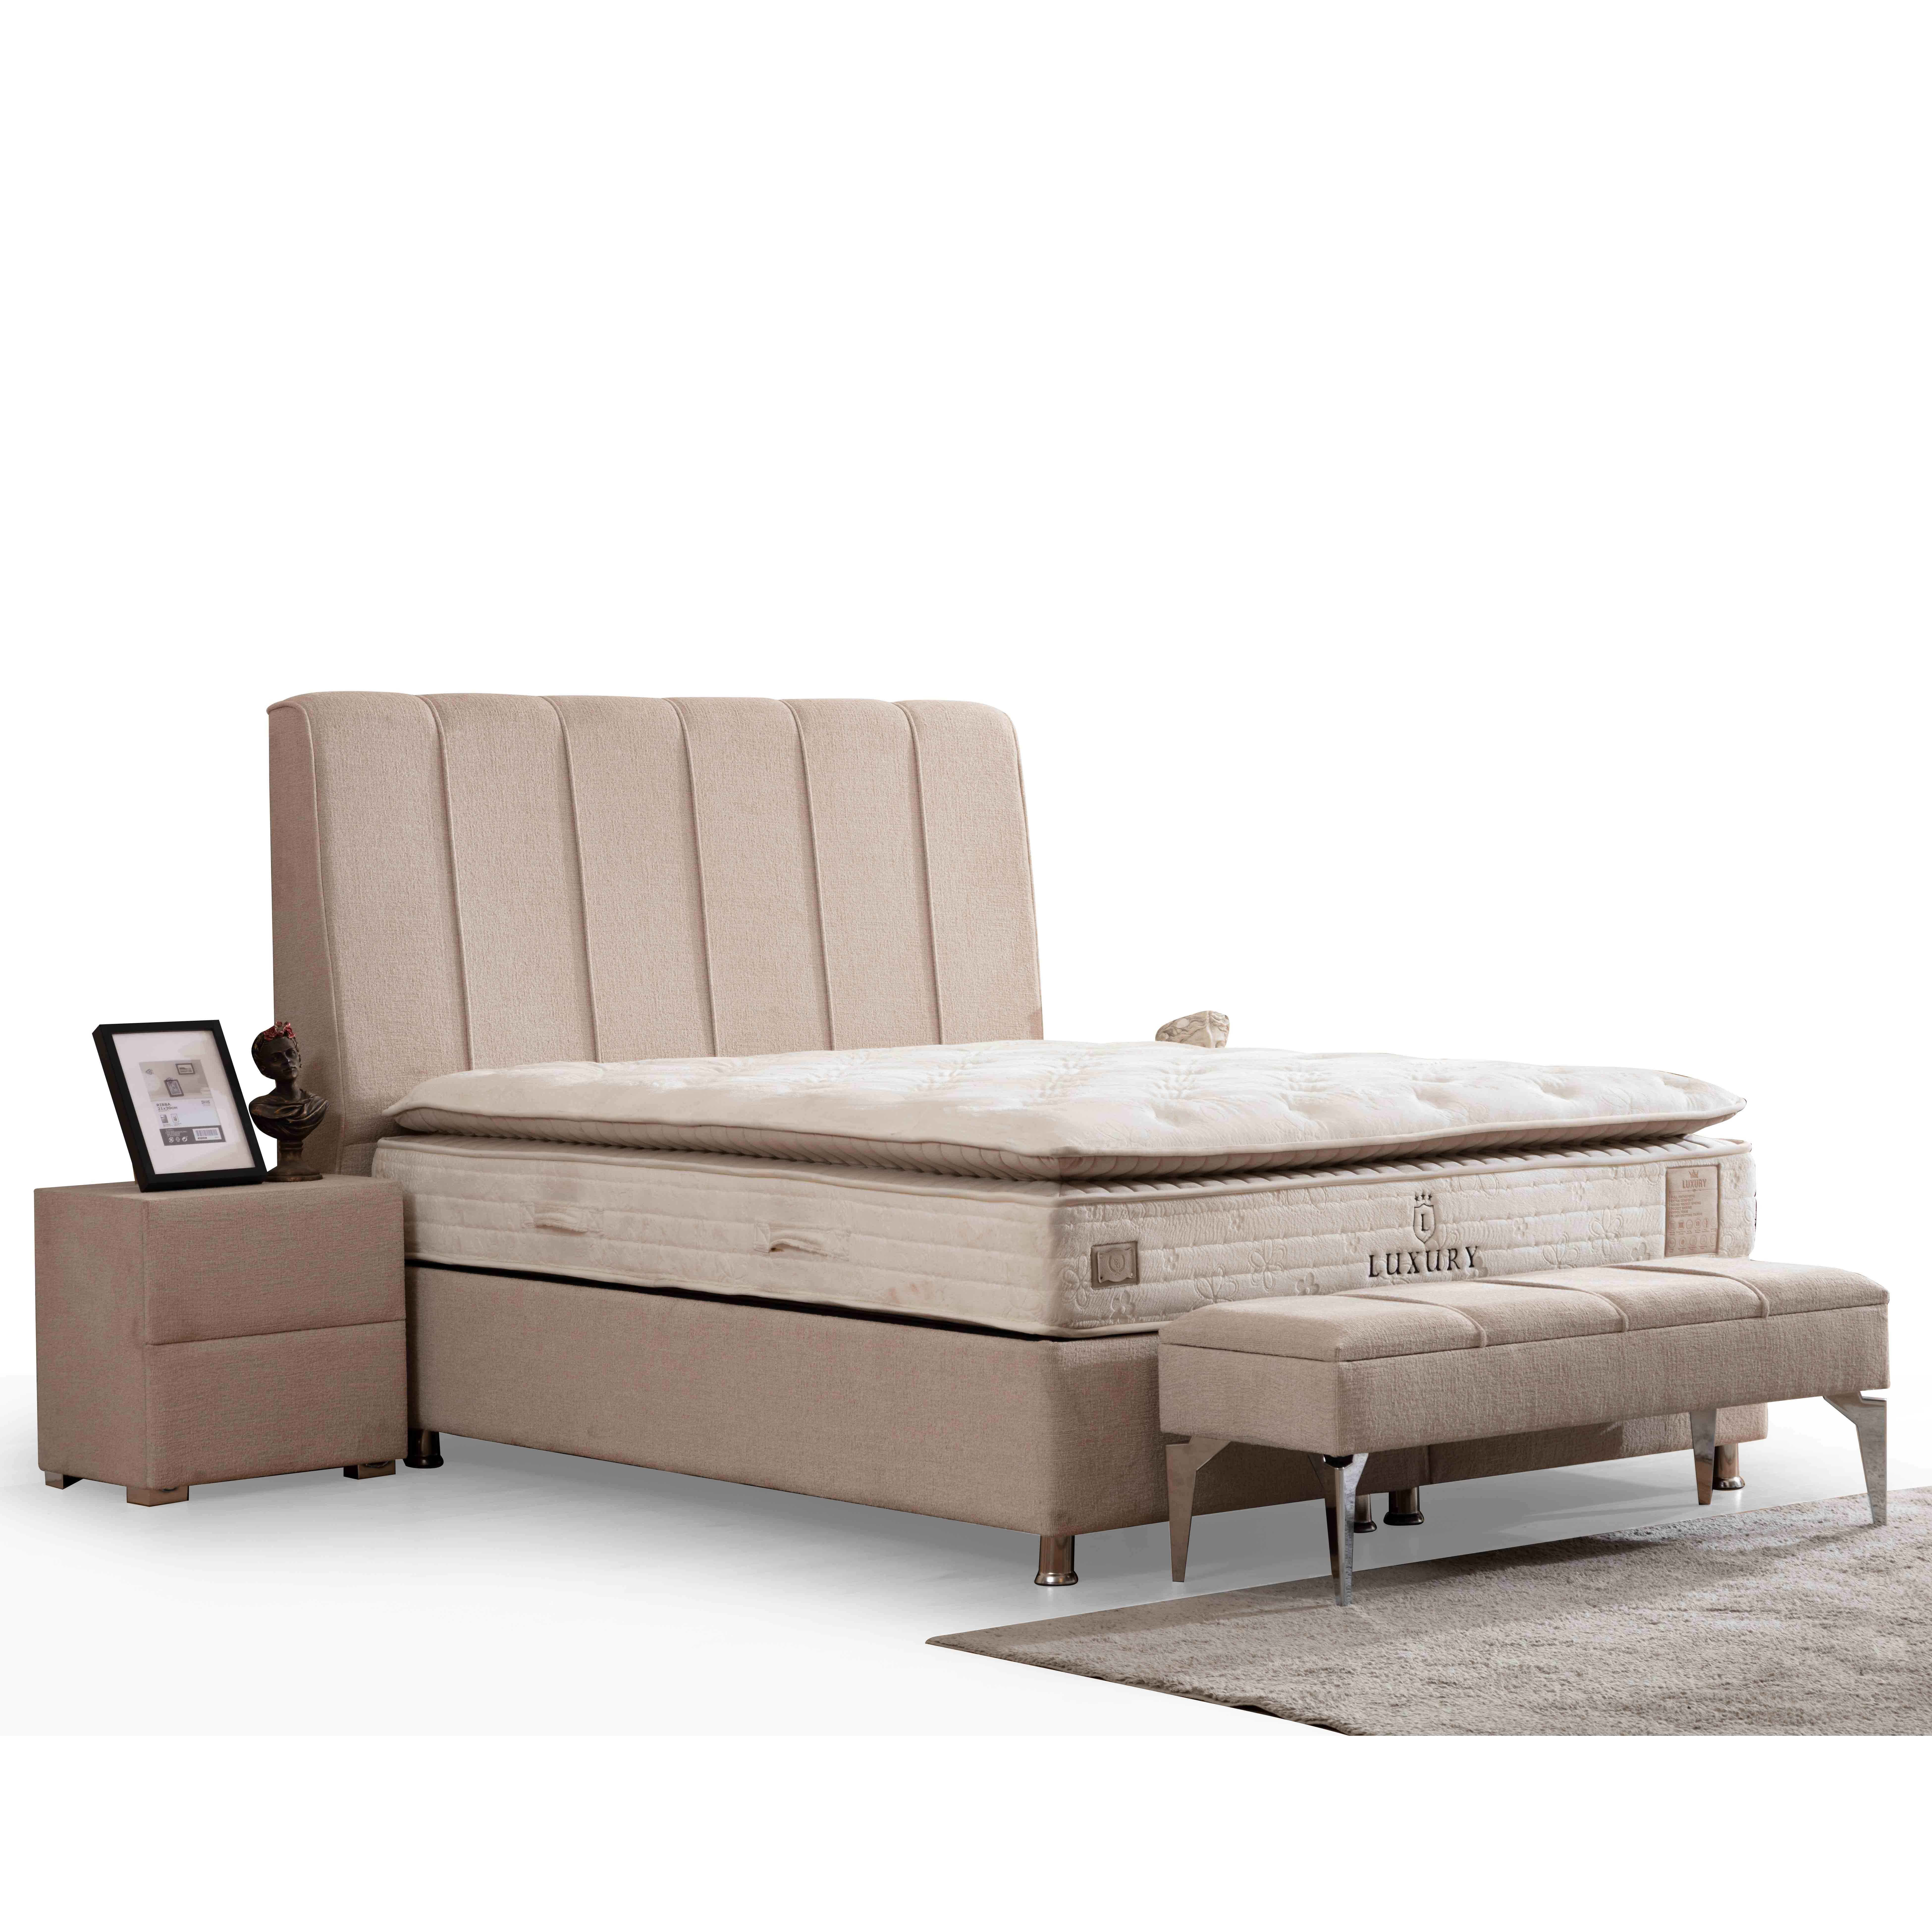 Prime Bed With Storage 160*200